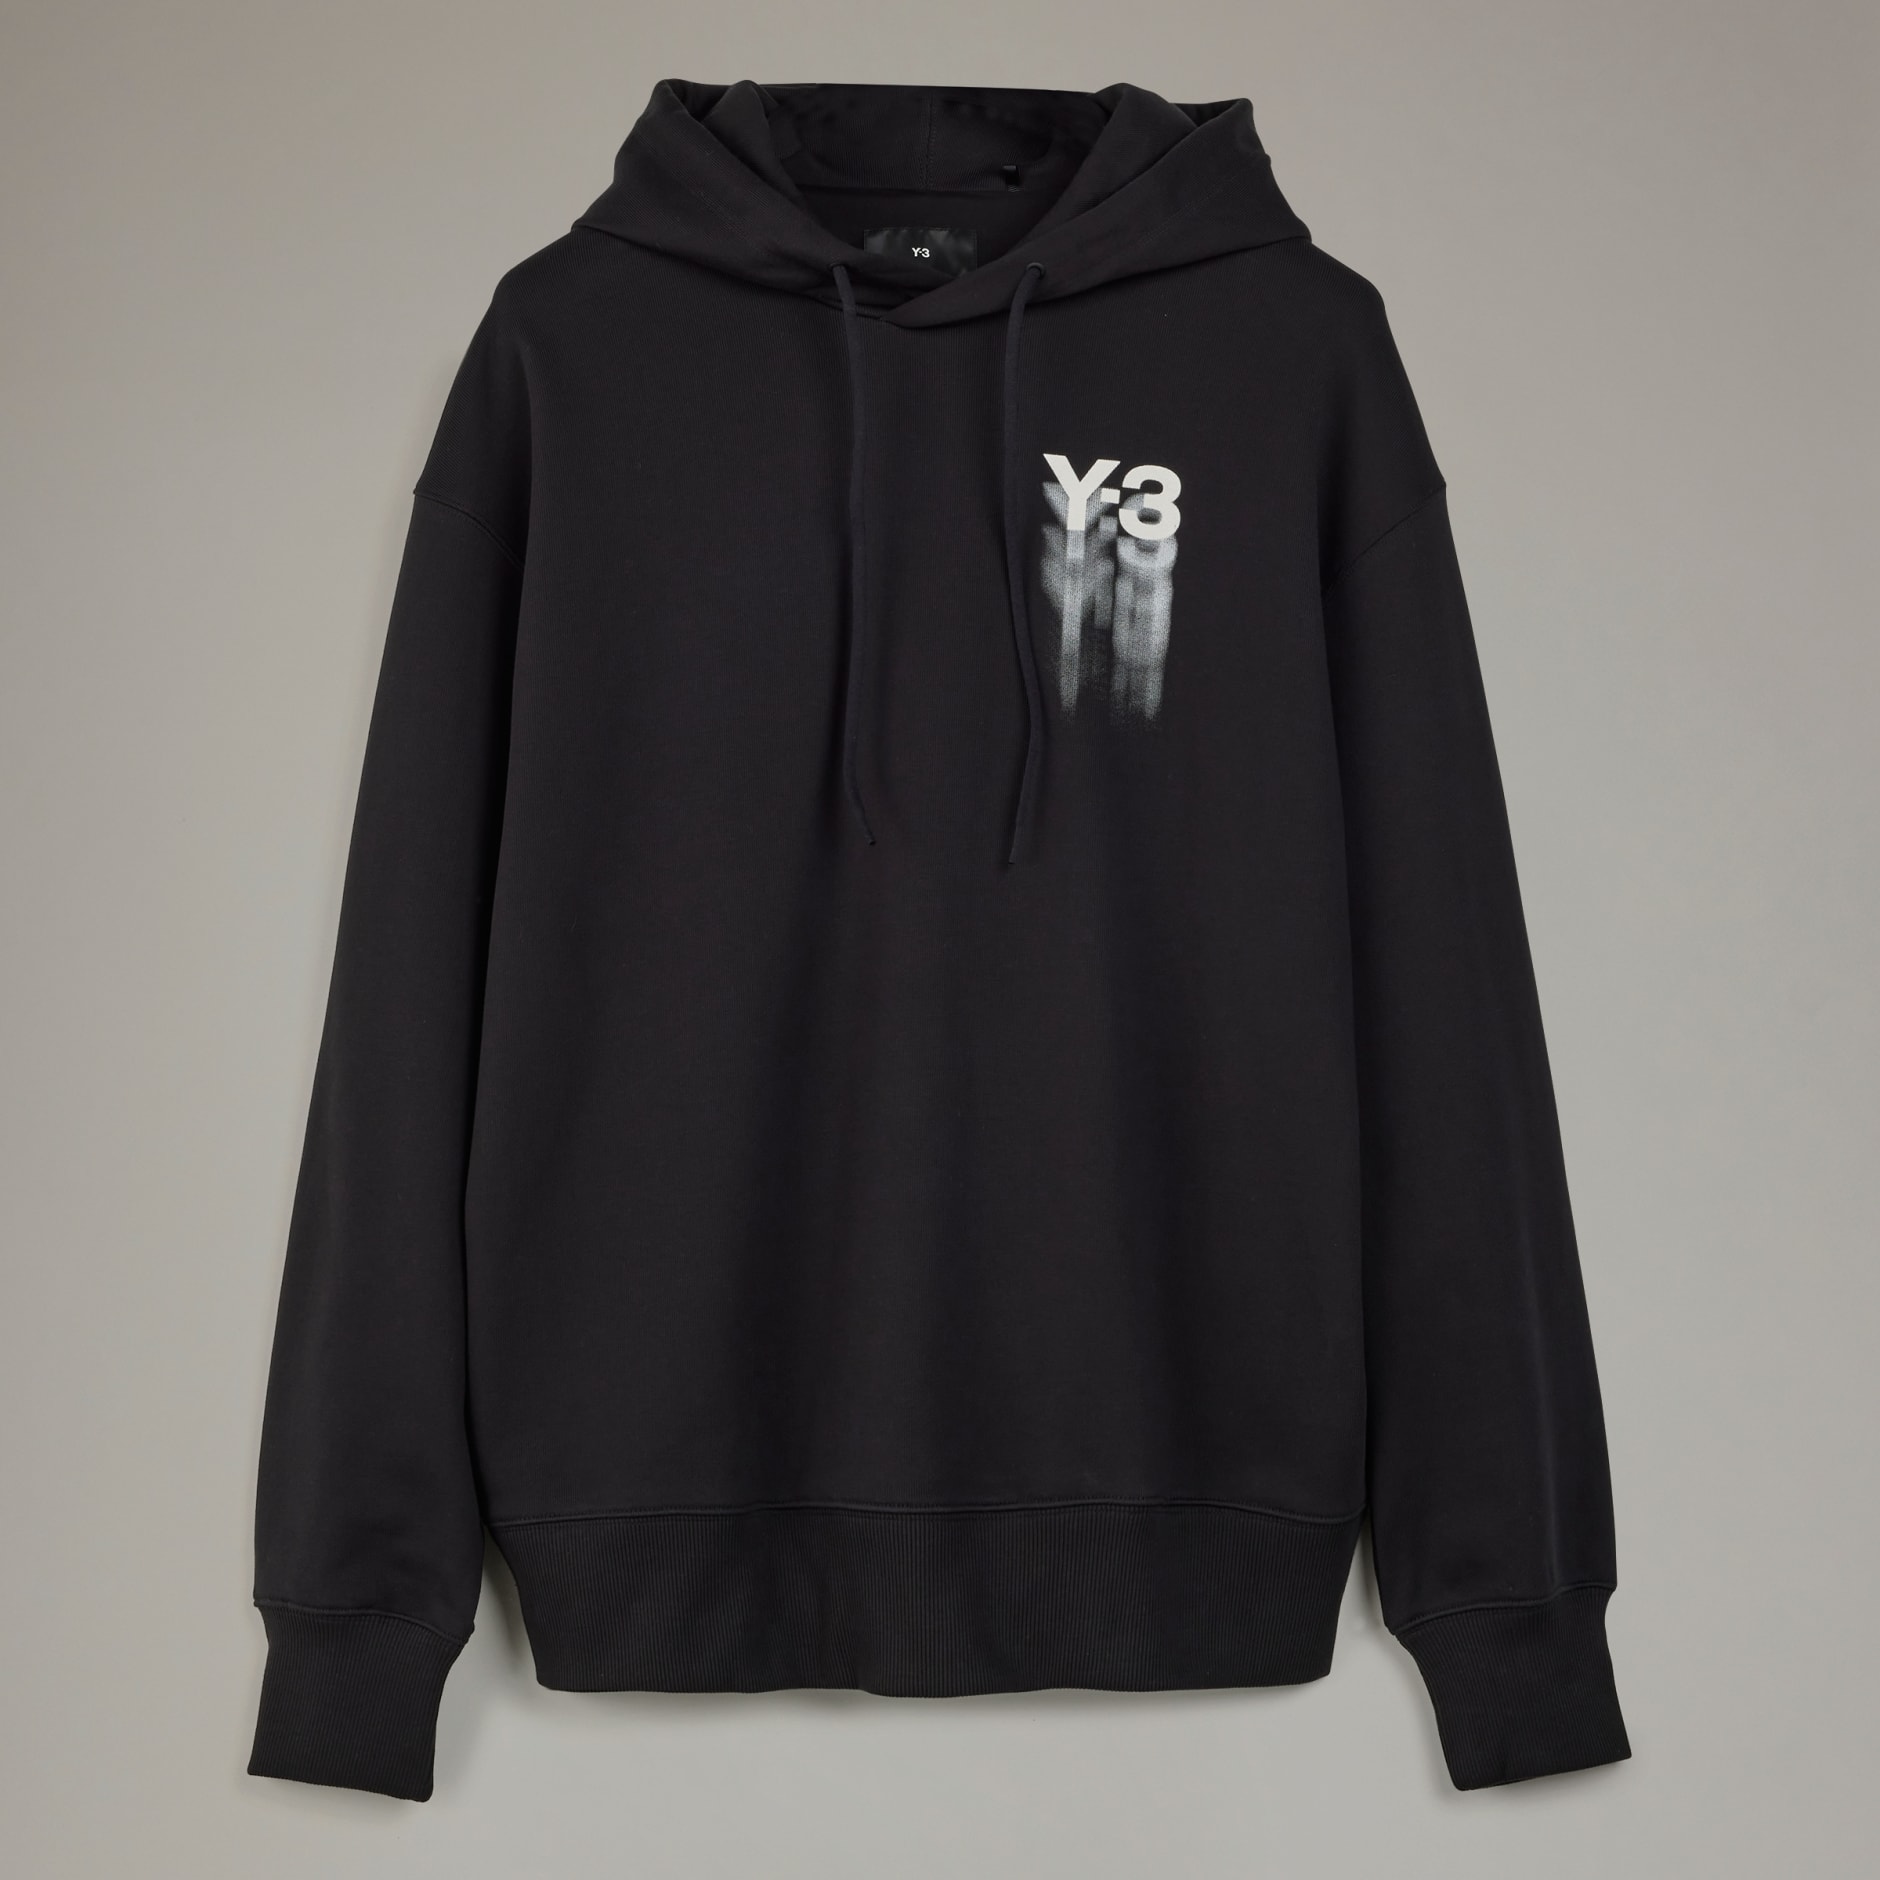 All products - Y-3 Graphic Hoodie - Black | adidas South Africa